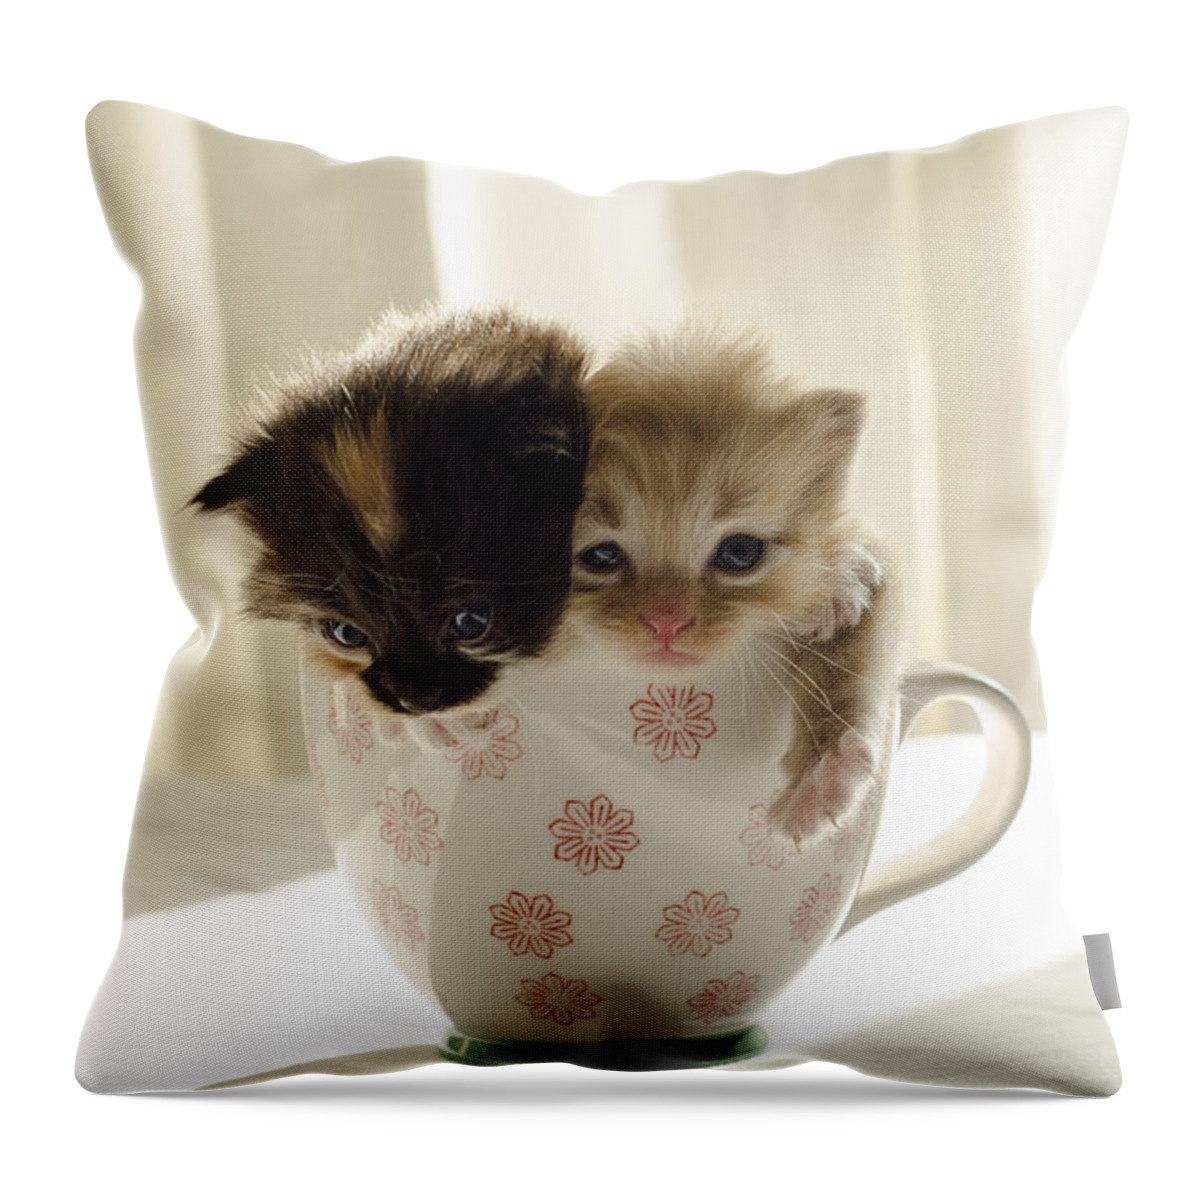 Cute Throw Pillow featuring the photograph A cup of cuteness by Spikey Mouse Photography